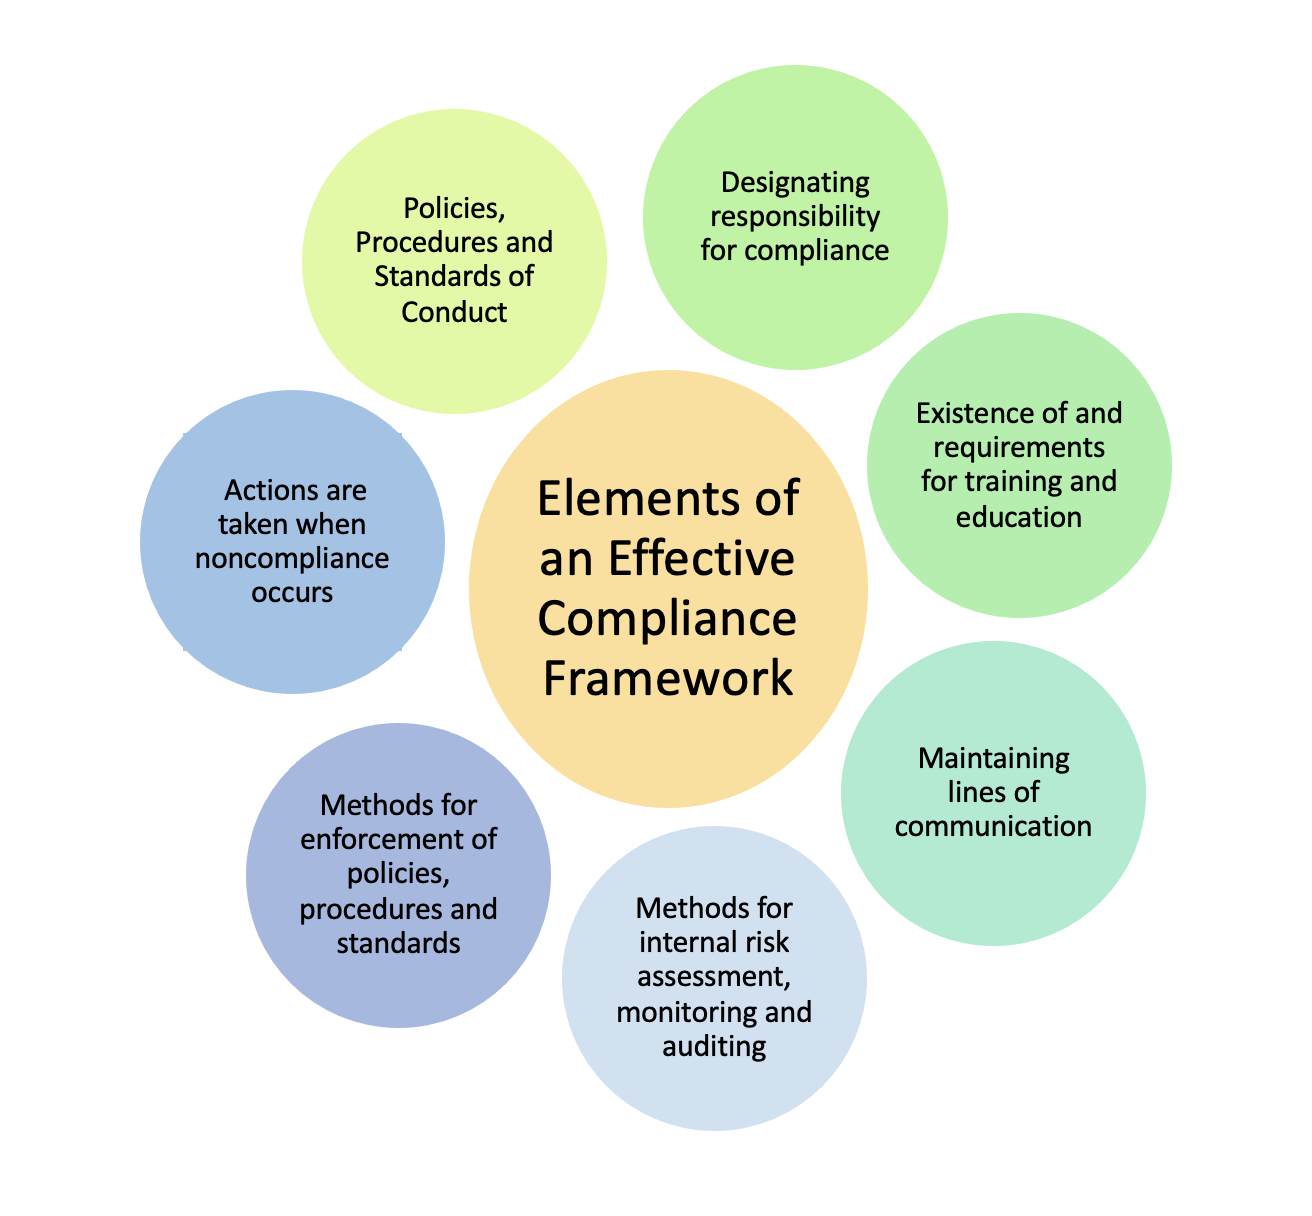 Elements of an Effective Compliance Framework:  Policies procedures and standards of conduct; Designating responsibility for compliance; Existence of requirements for training and education; Maintaining lines of commmunication; Methods for internal risk assessment, monitoring and auditing; Methods for enforcement of policies, procedures and standards; Actions are taken when noncompliance occues.